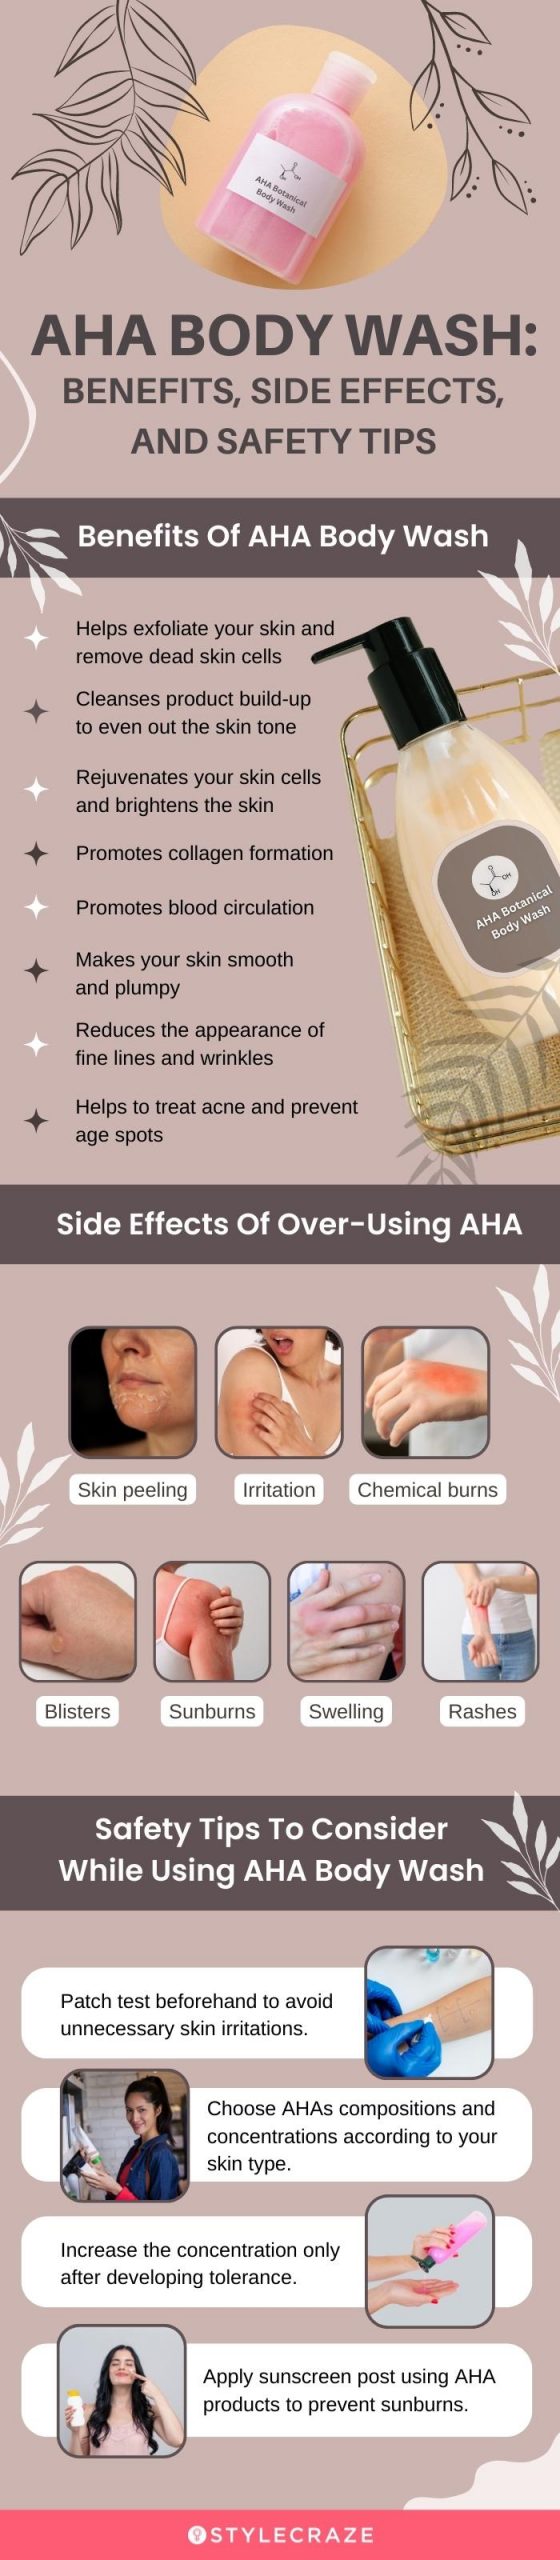 AHA Body Wash: Benefits, Side Effects, And Safety Tips